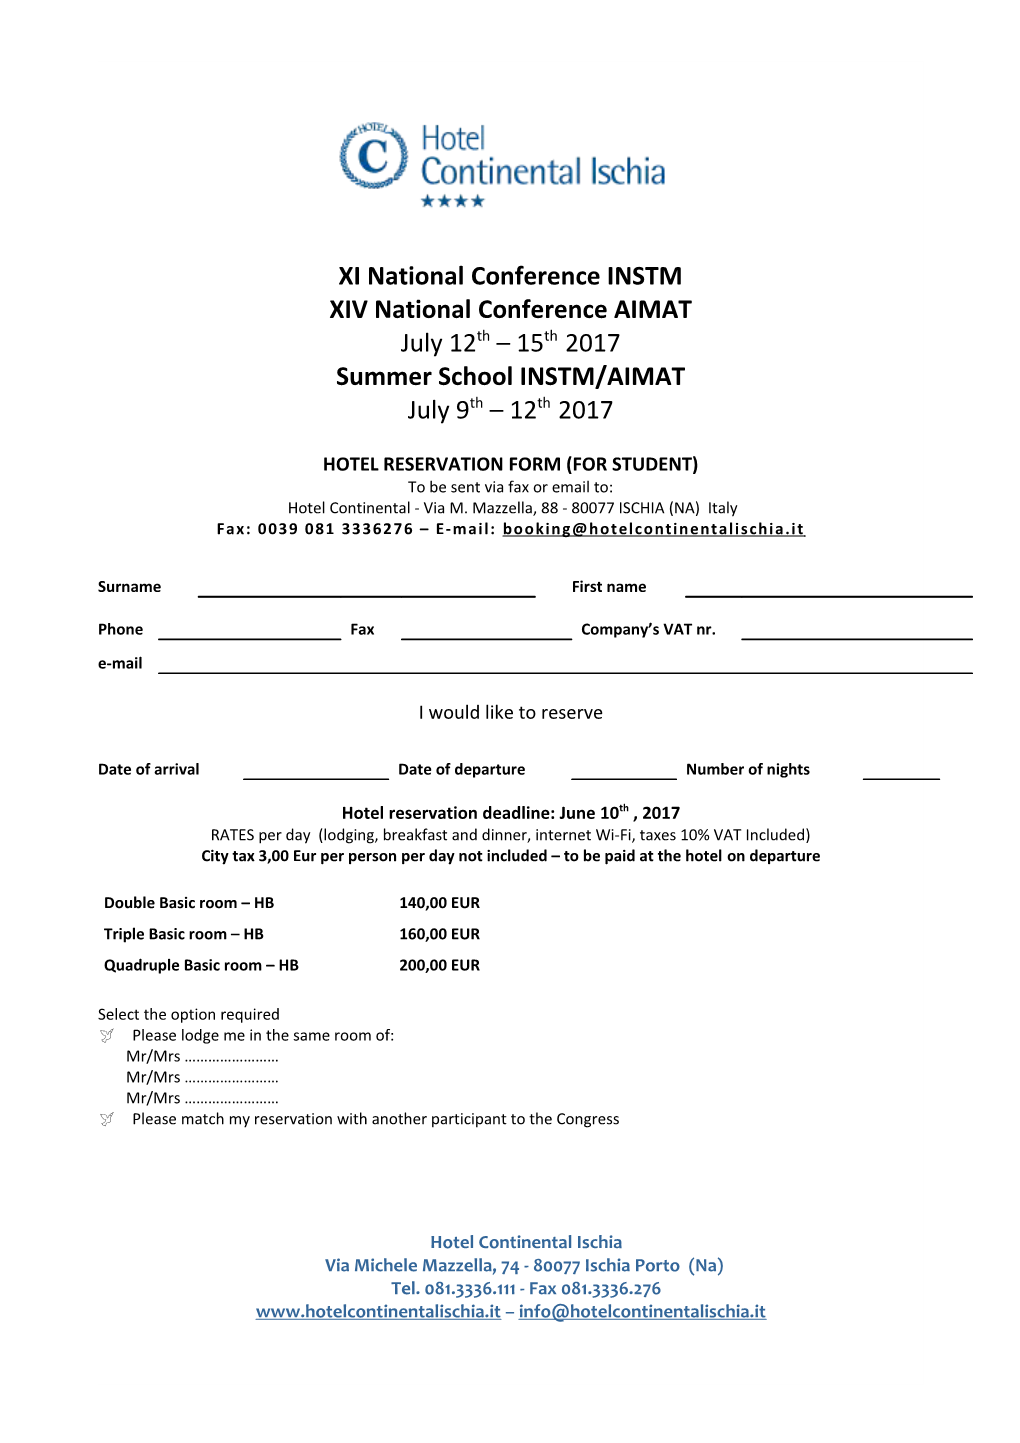 XIV National Conference AIMAT